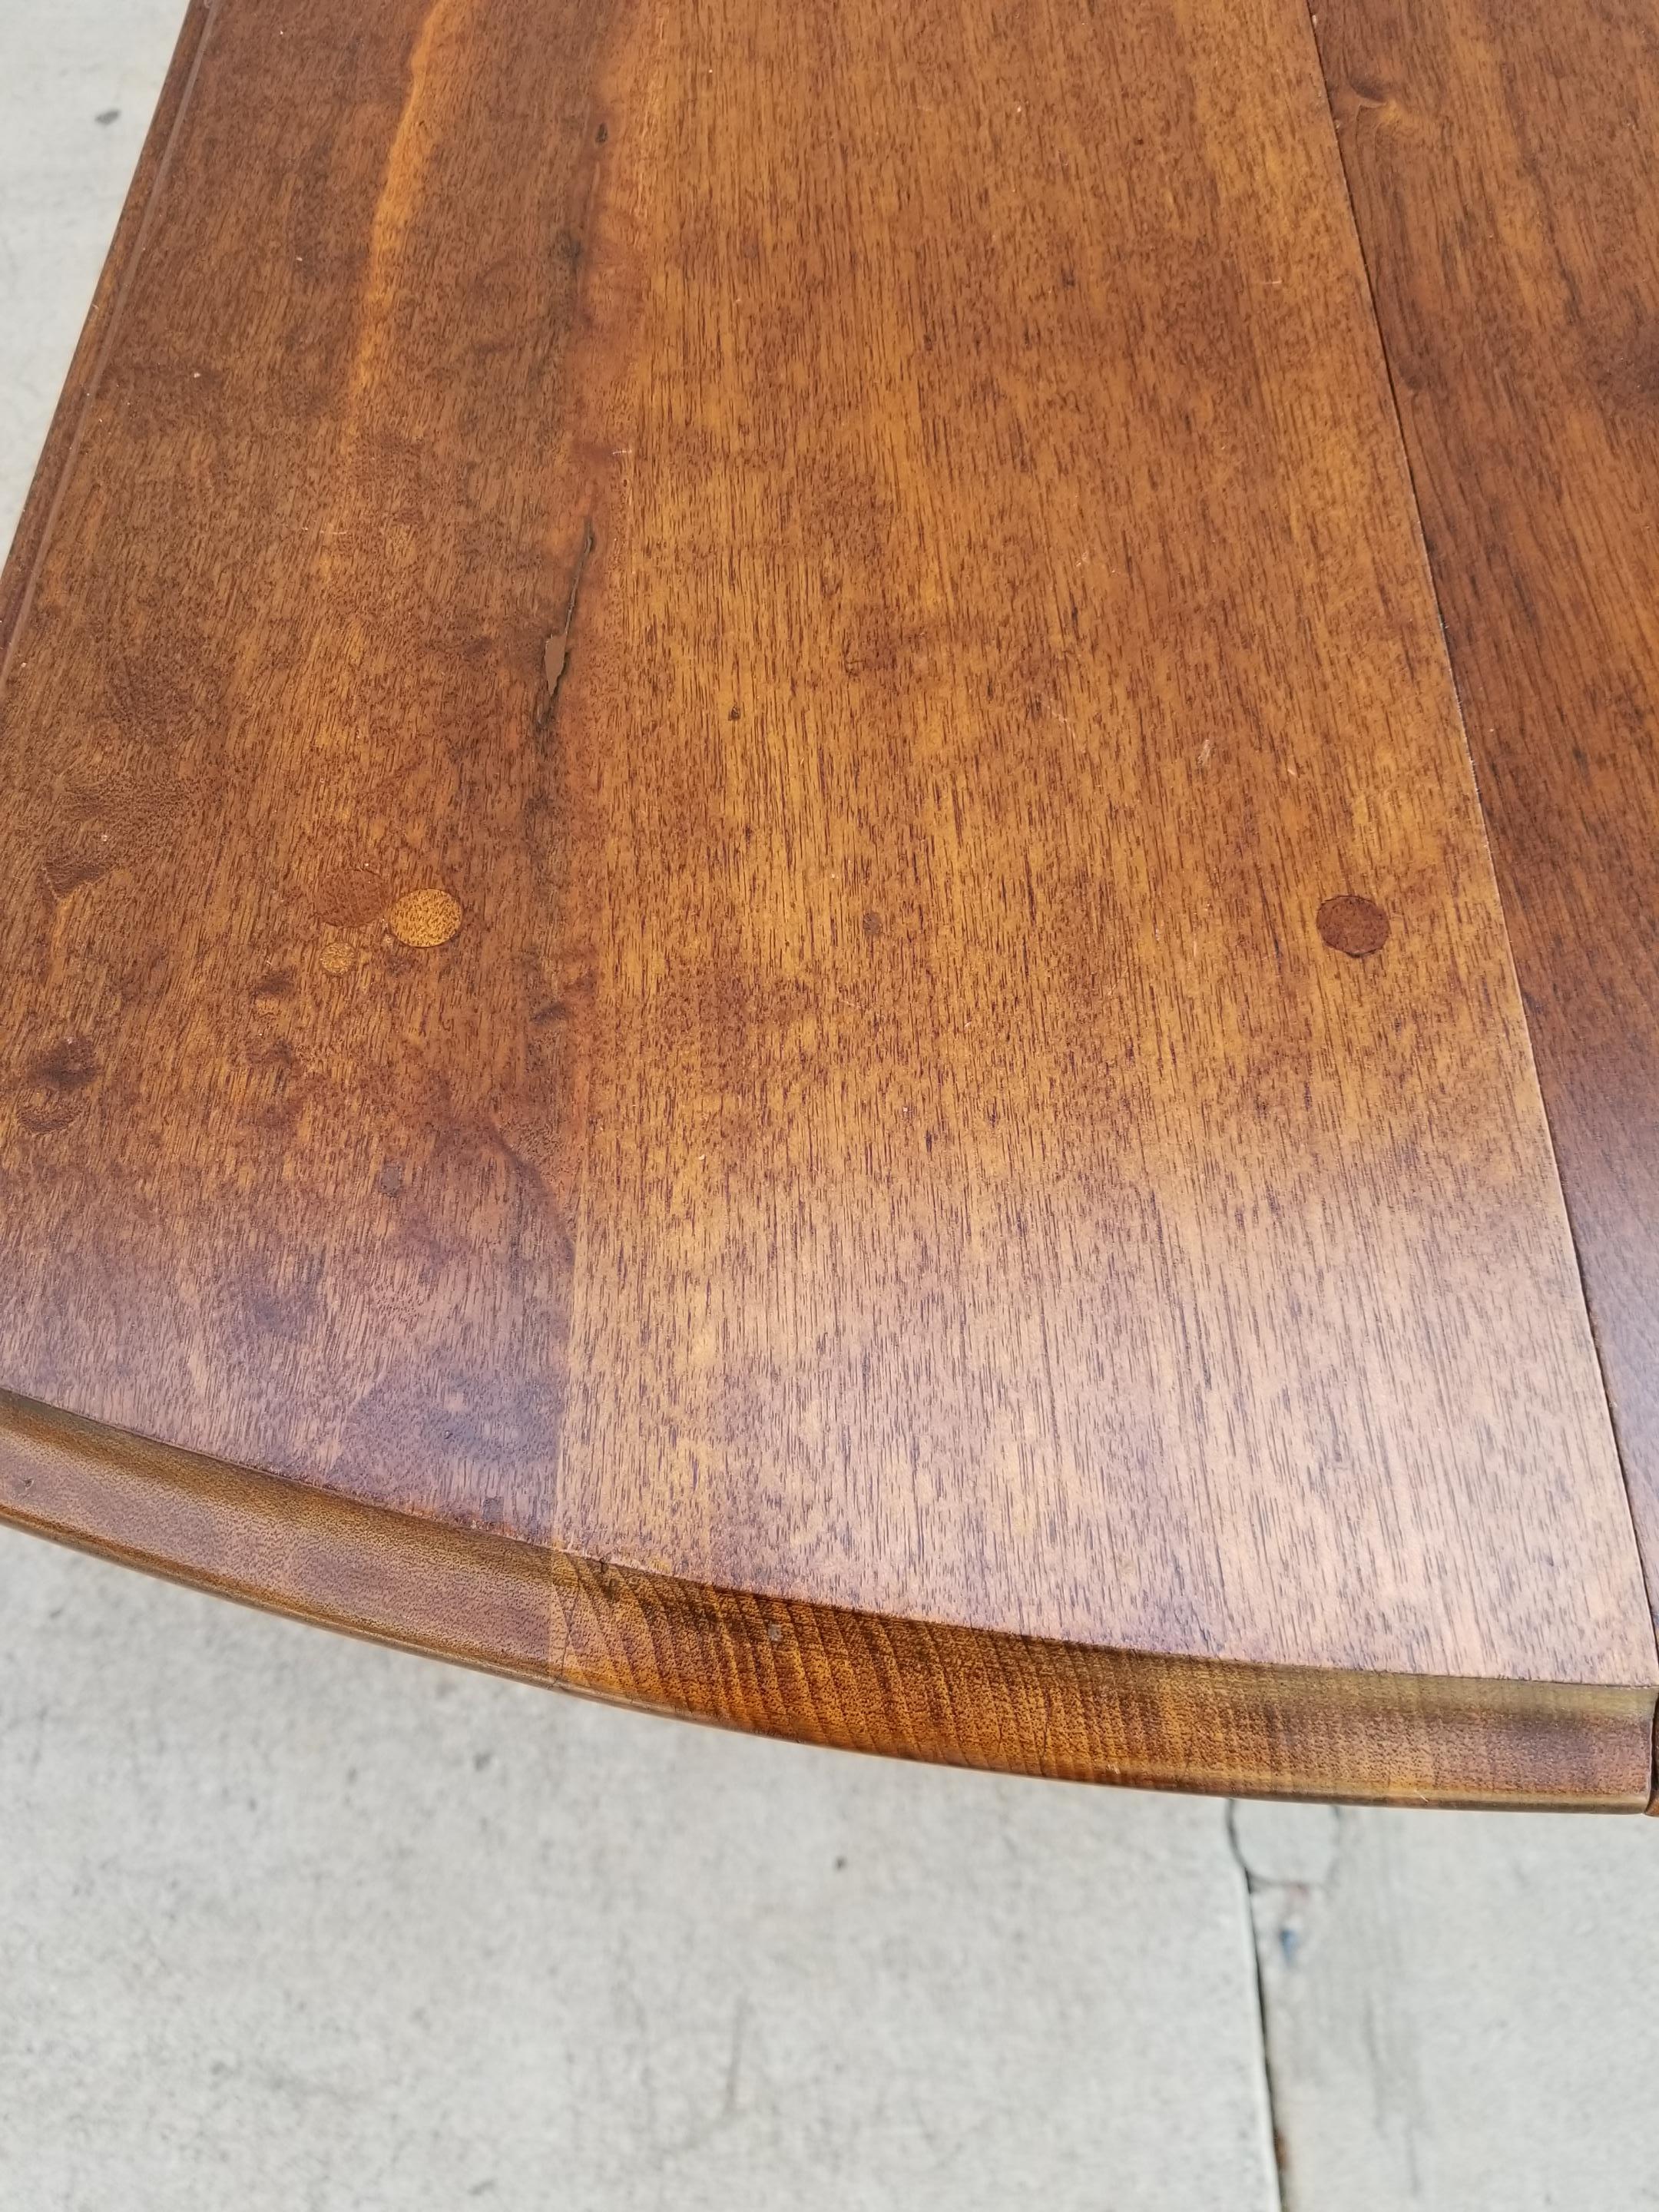 Antique 19th Century Drop Leaf Dining Table in Solid Walnut 1